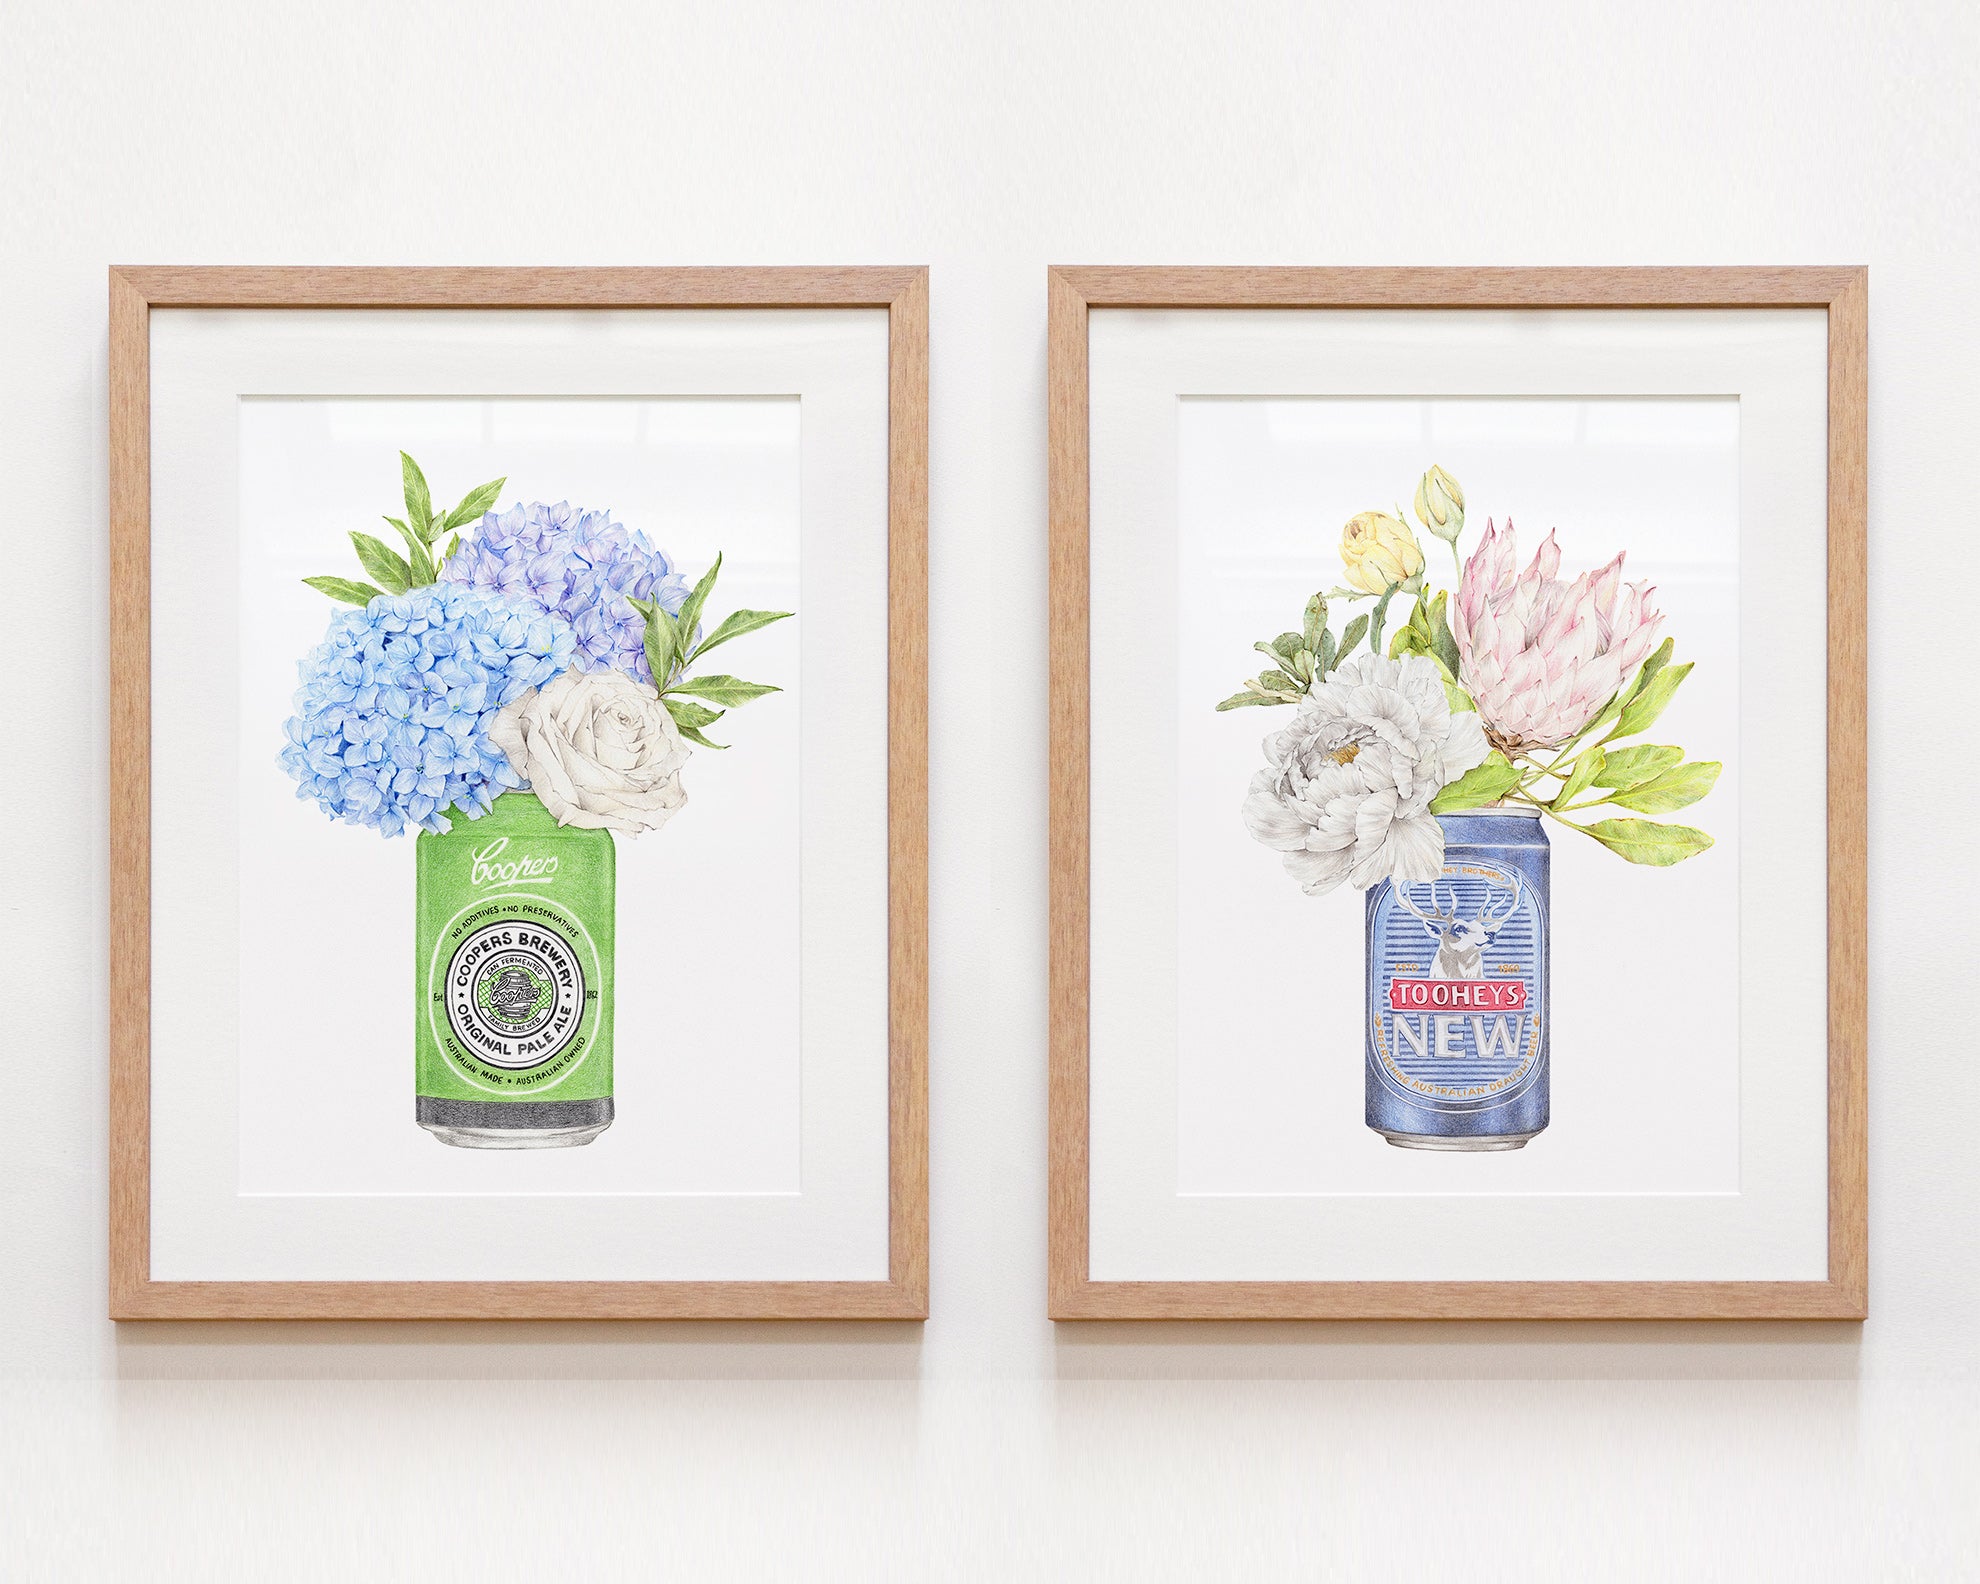 Framed wall art with Tooheys and Coopers Pale Ale